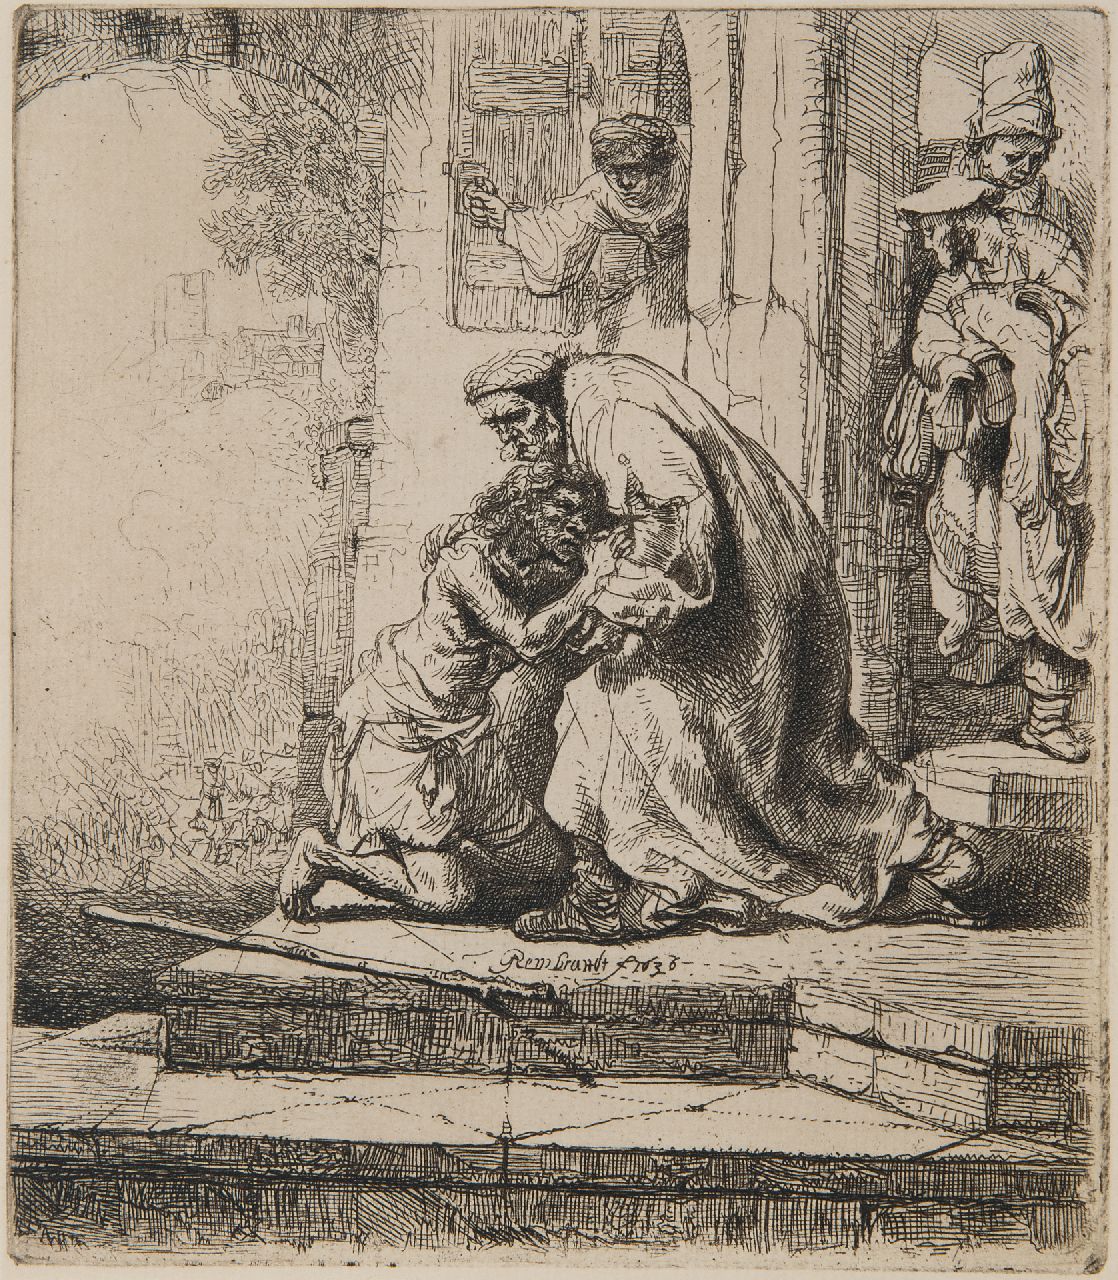 Rembrandt (Rembrandt Harmensz. van Rijn)   | Rembrandt (Rembrandt Harmensz. van Rijn), The return of the prodigal son, etching 15.6 x 13.6 cm, signed l.c. (in the plate) and dated 1636 (in the plate)